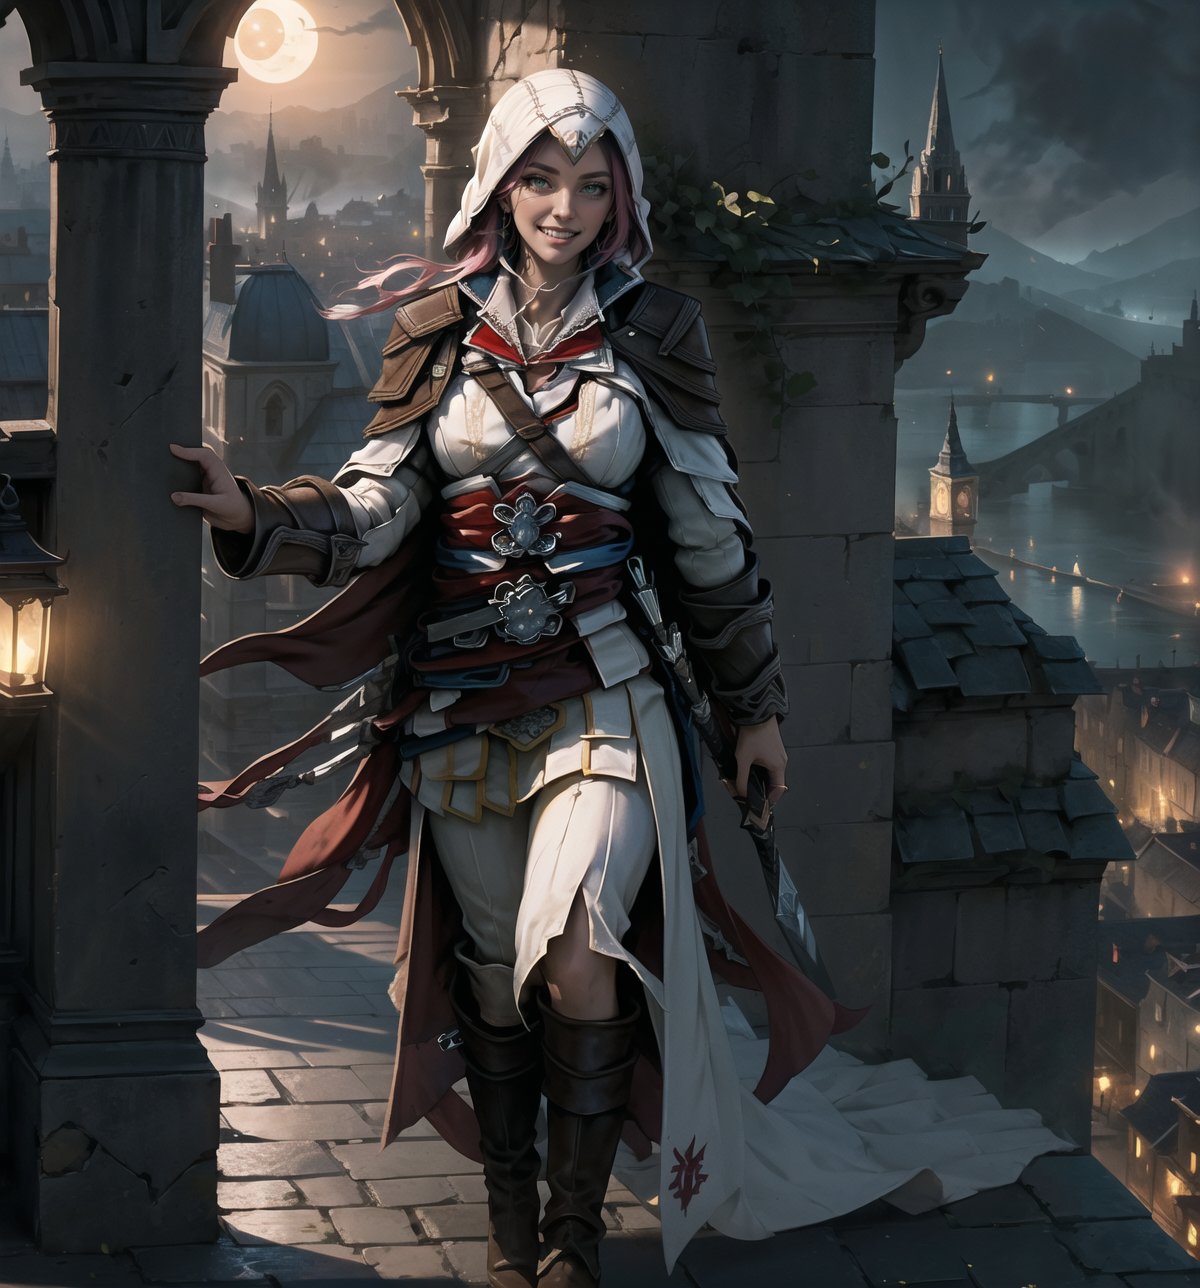 An ultra-detailed 16K masterpiece with ((Assassin's Creed)) and adventure styles, rendered in ultra-high resolution with realistic details. | Emily, a 30-year-old woman, dressed in an Assassin's Creed costume. The costume is white and gray, with black and red details, and has several accessories, such as a cape, a sword and a hidden blade. Her pink hair is long and wavy, tied into a high bun. She has green eyes, looking at the viewer, ((smiling and showing her teeth)). It is located on top of a cathedral at night, with a panoramic view of the city below. The place is historic and mysterious, with an atmosphere of adventure and danger. | The image highlights Emily's powerful and imposing figure and the historic and mysterious elements of the cathedral. The cathedral, the cloak, the sword and the hidden blade, together with the woman, create a magical and exciting environment. The panoramic view of the city at night adds a touch of drama and mystery to the setting. The shadows created by the moonlight highlight the details of the scene and create a tense and energetic atmosphere. | Dramatic and moody lighting effects create a mysterious and immersive atmosphere, while detailed textures on the structures, cape and costume add realism to the image. | A moving and historic scene of a woman in an Assassin's Creed costume atop a cathedral at night, exploring themes of adventure, mystery and danger. | (((The image reveals a full-body_shot as Emily assumes a sensual pose, engagingly leaning against a structure within the scene in an exciting manner. She takes on a sensual pose as she interacts, boldly leaning on a structure, leaning back and boldly throwing herself onto the structure, reclining back in an exhilarating way.))). | (((full-body_shot))), ((perfect pose)), ((perfect fingers, better hands, perfect hands)), ((perfect legs, perfect feet)), ((huge breasts)), ((perfect design)), ((perfect composition)), ((very detailed scene, very detailed background, perfect layout, correct imperfections)), More Detail, Enhance